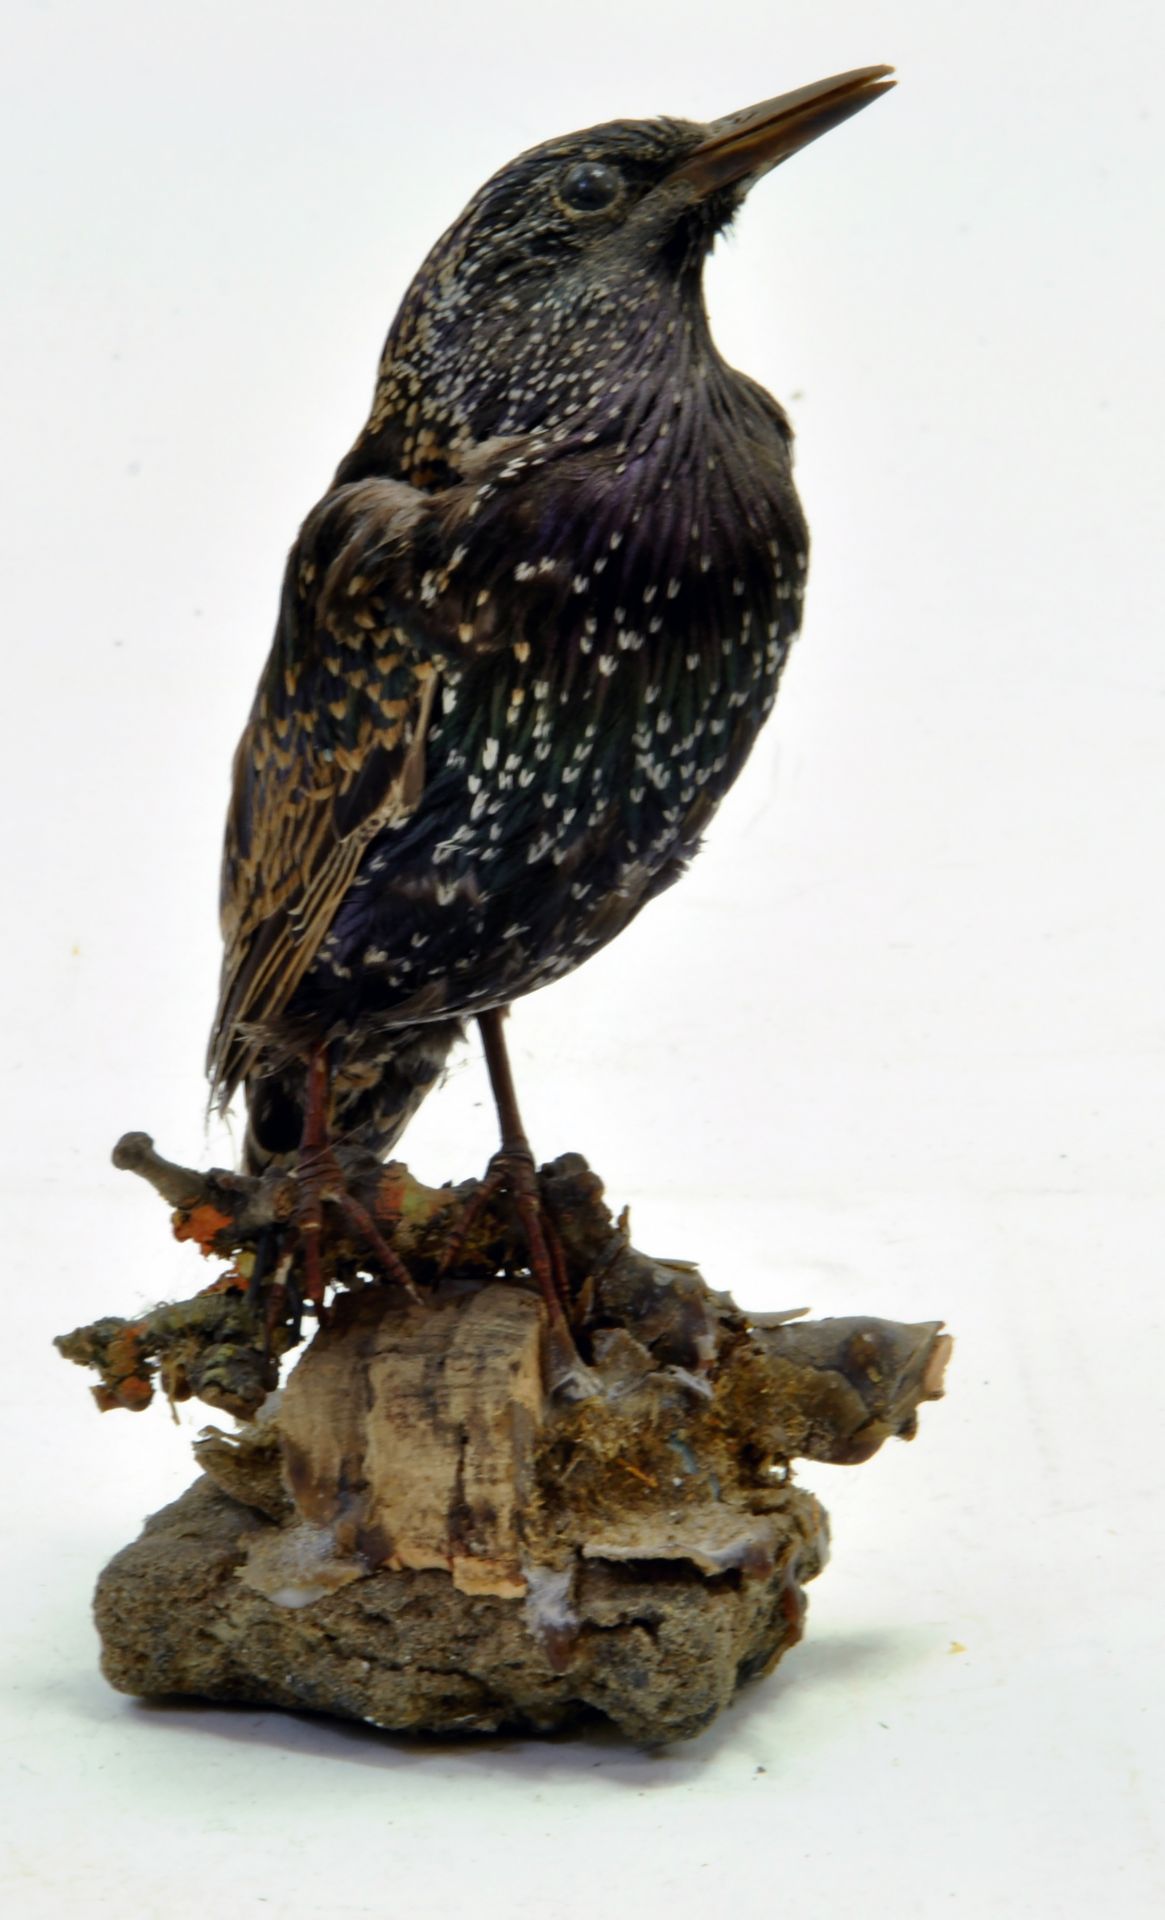 Taxidermy: An early 21st century example of a Starling (Sturnus vulgaris), mounted on a log based